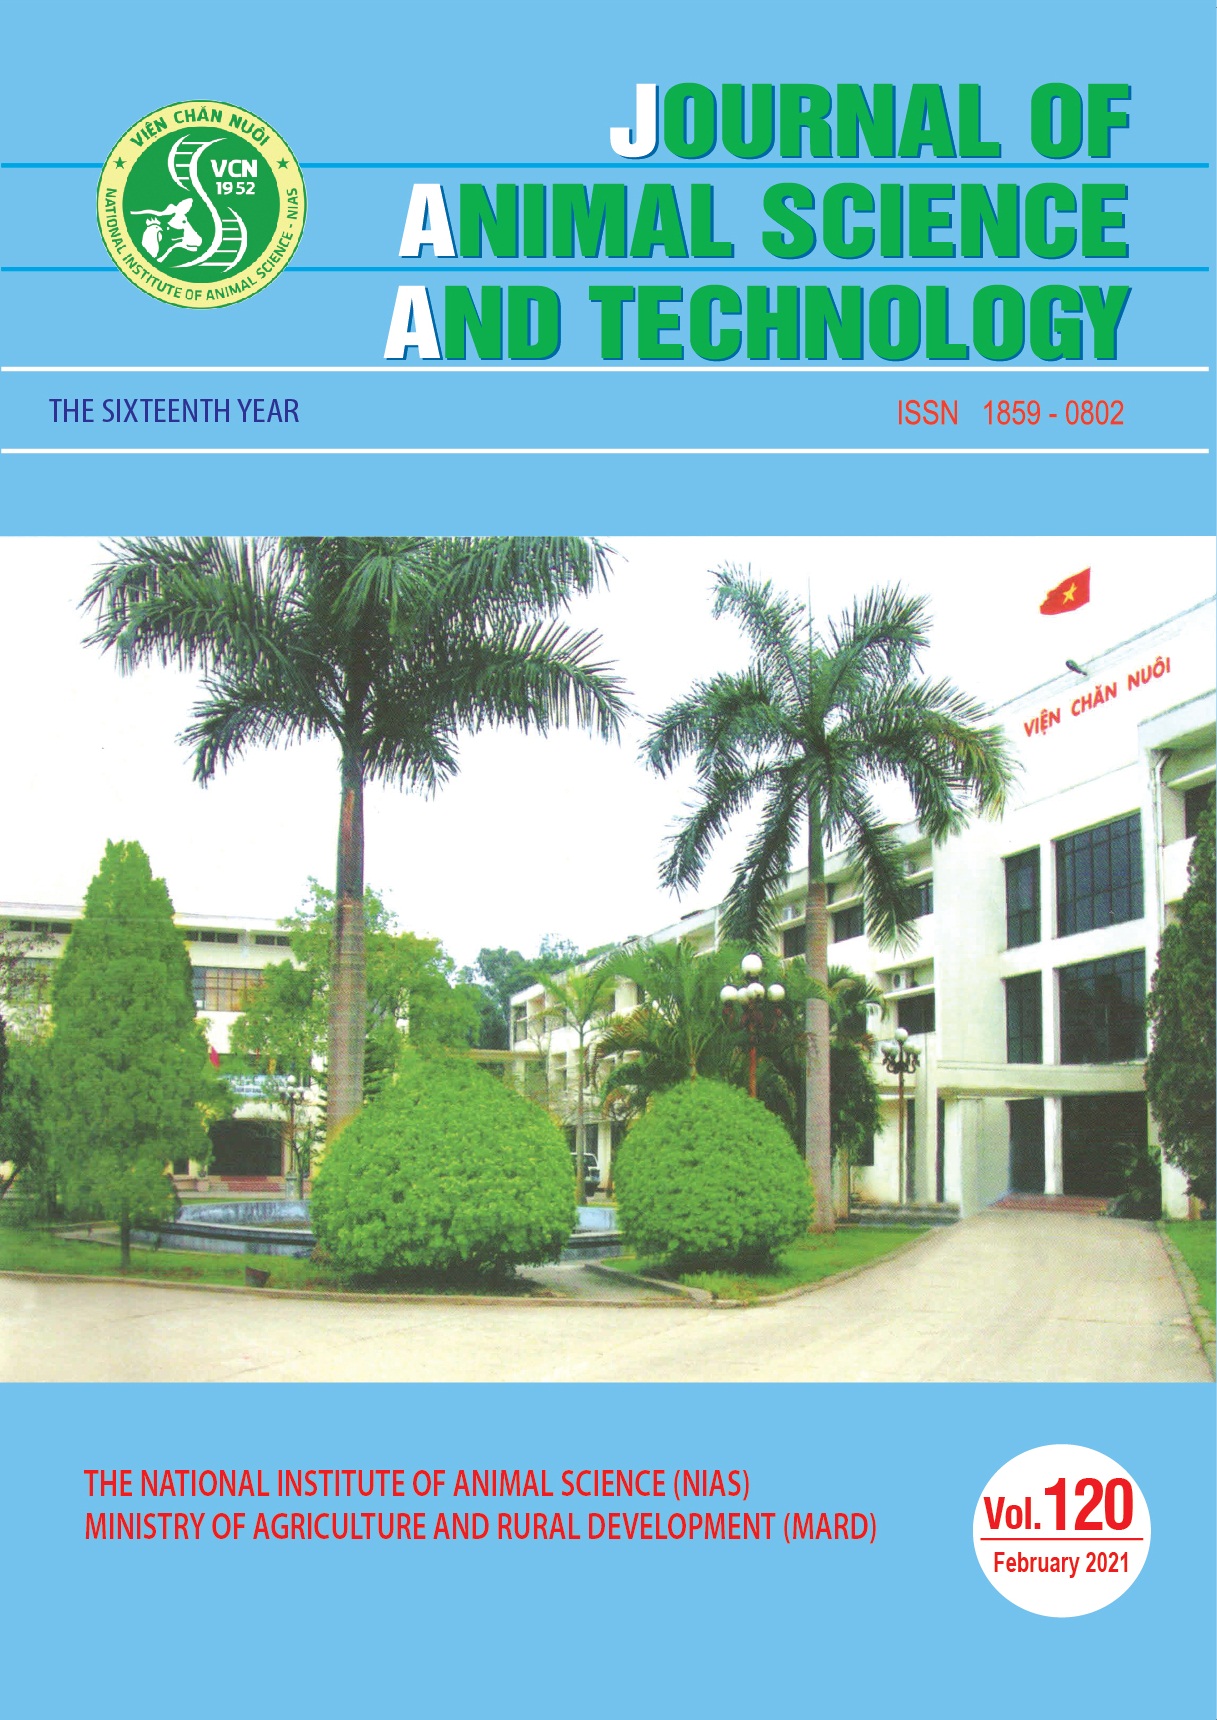 Journal of Animal Science and Technology – Vol 120. February, 2021